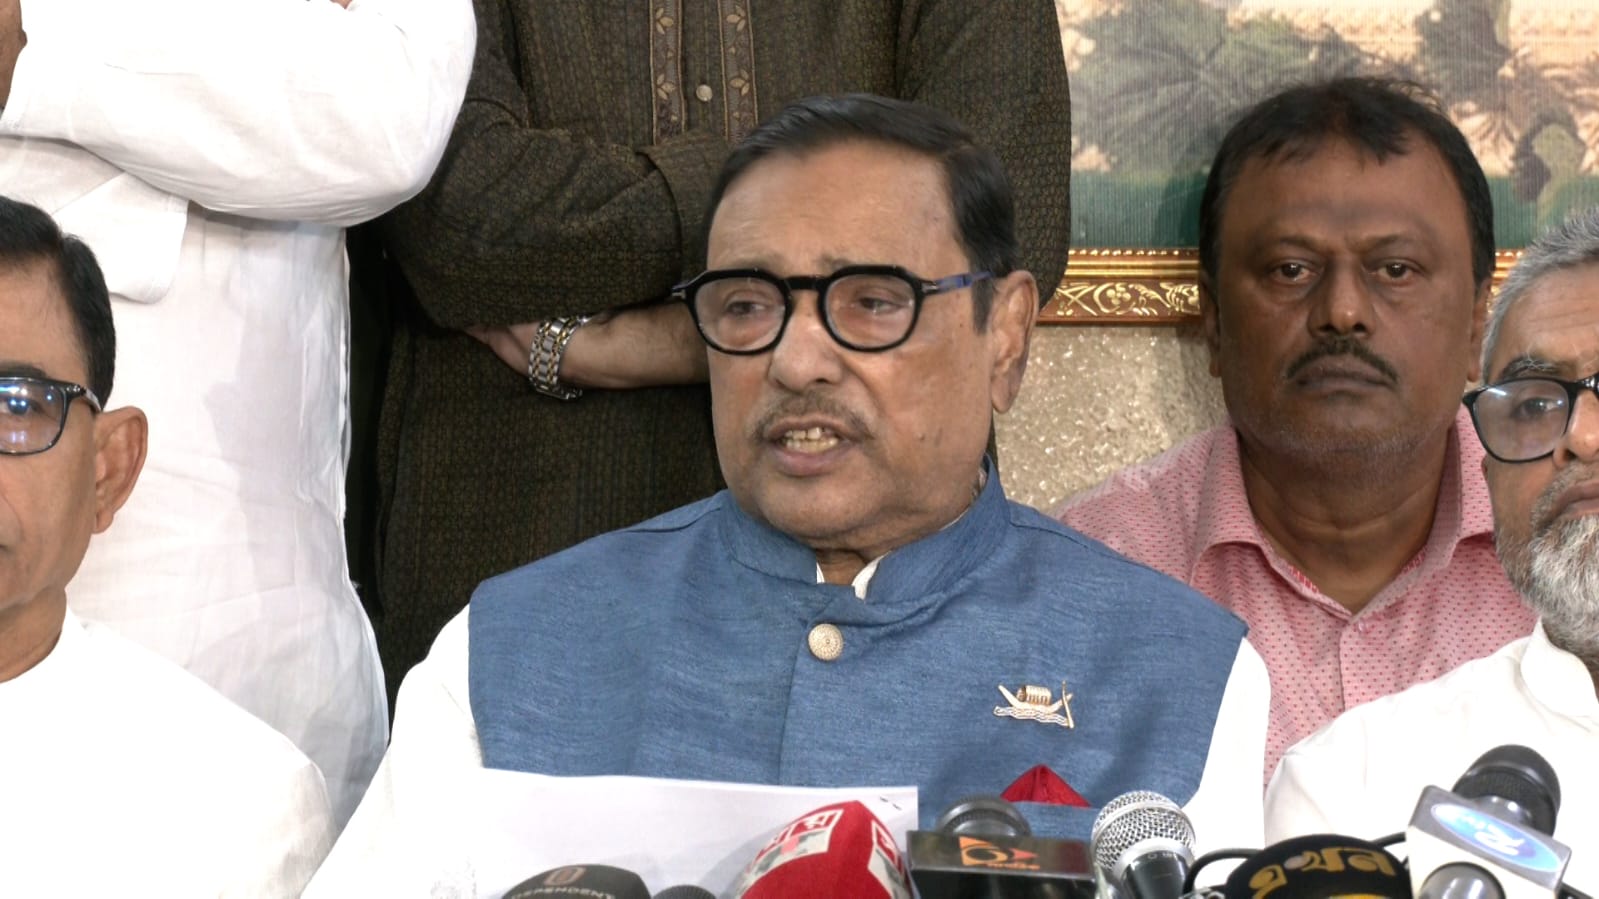 Those who want to keep govt under pressure are themselves under pressure: Quader